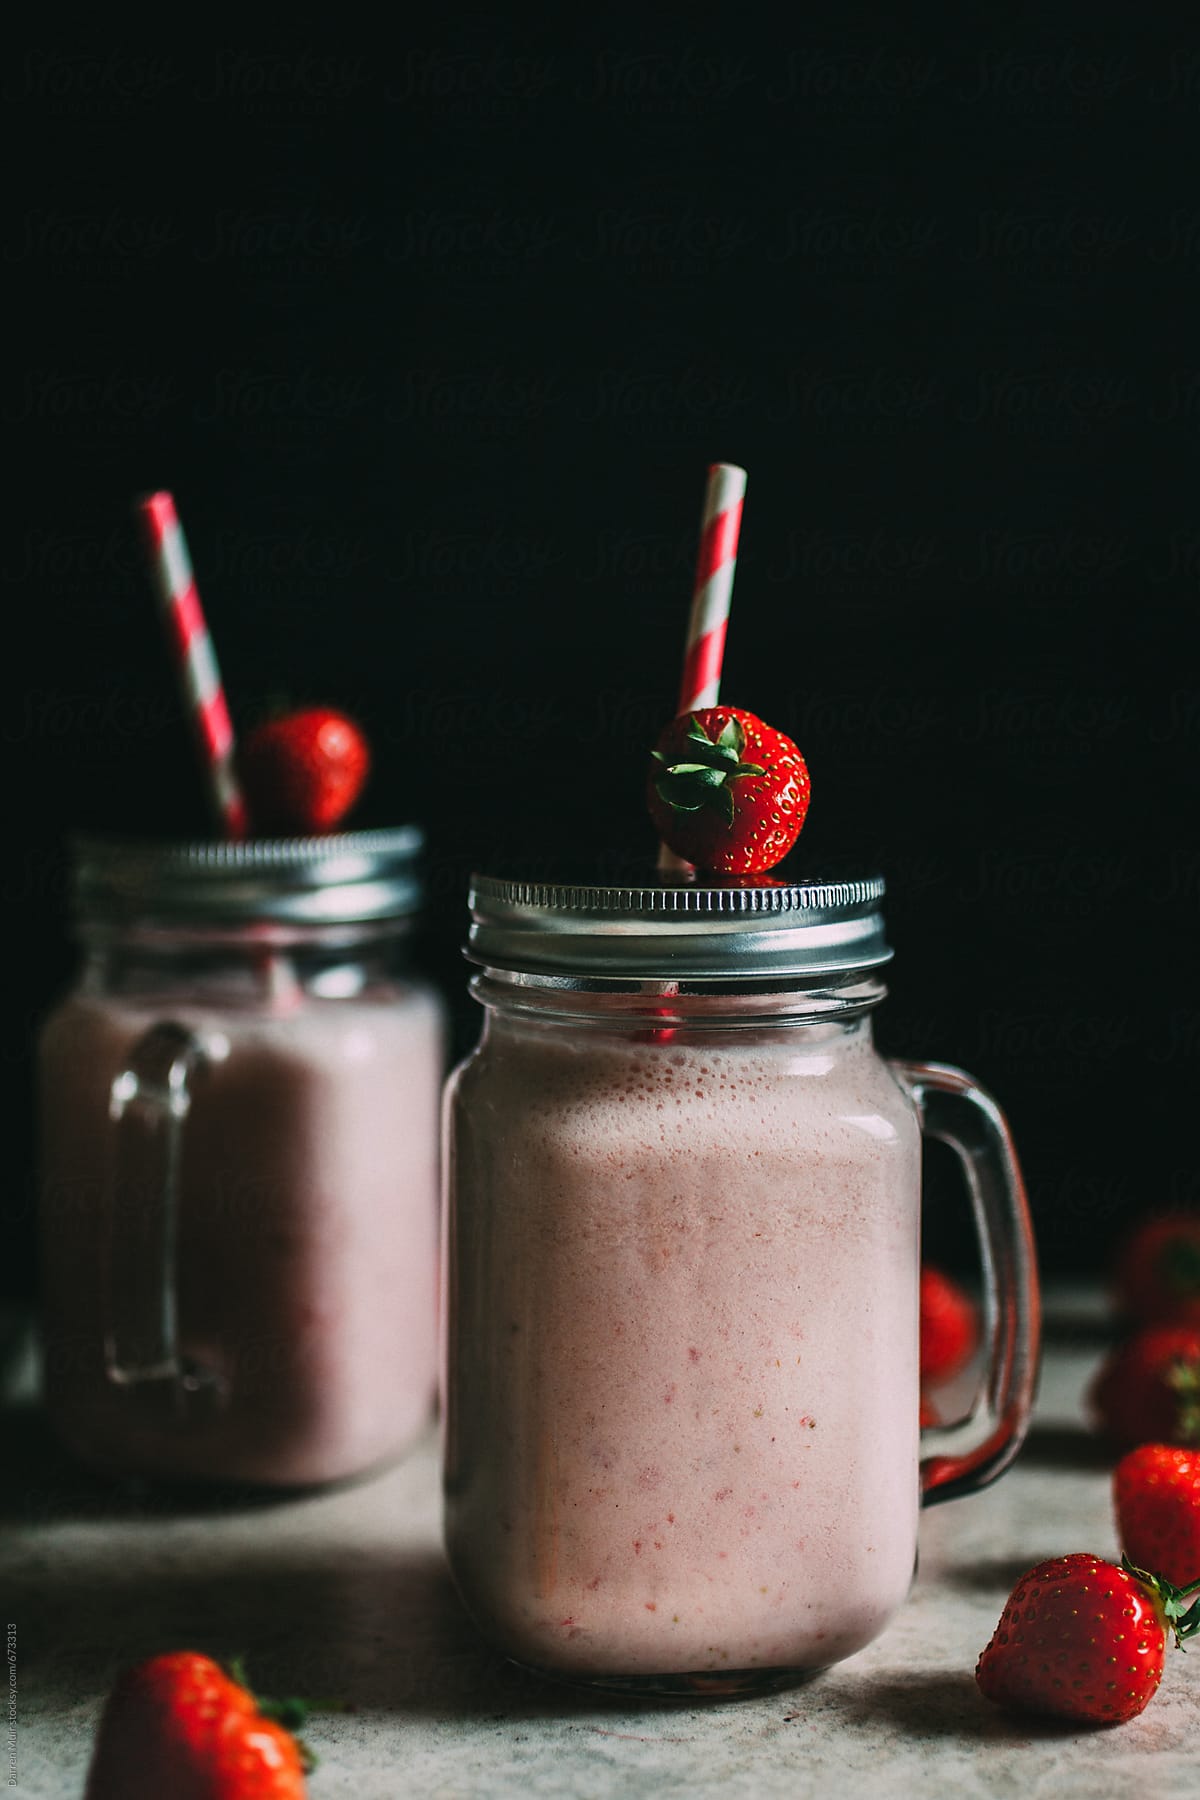 Strawberry smoothies: Served in drinking jars with straws.